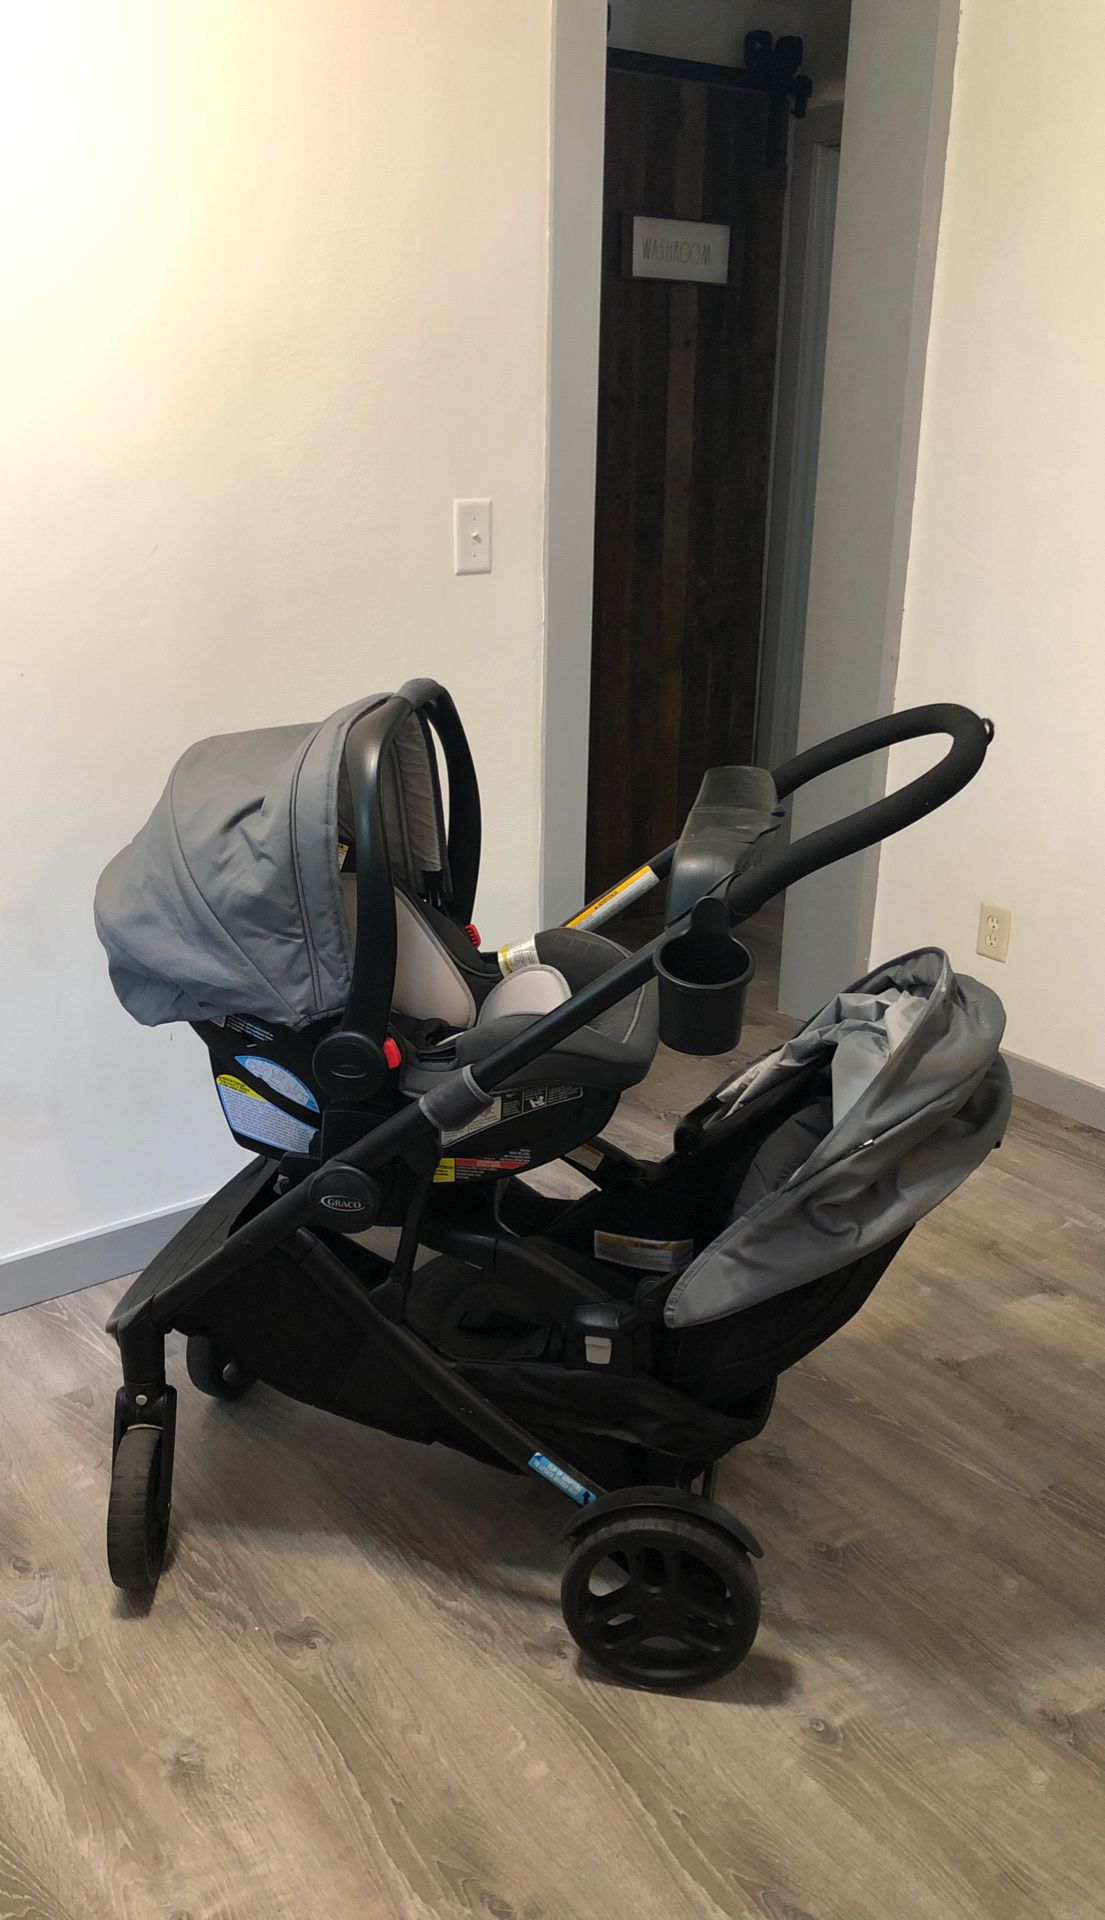 Modes to Grow Stroller car seat and base